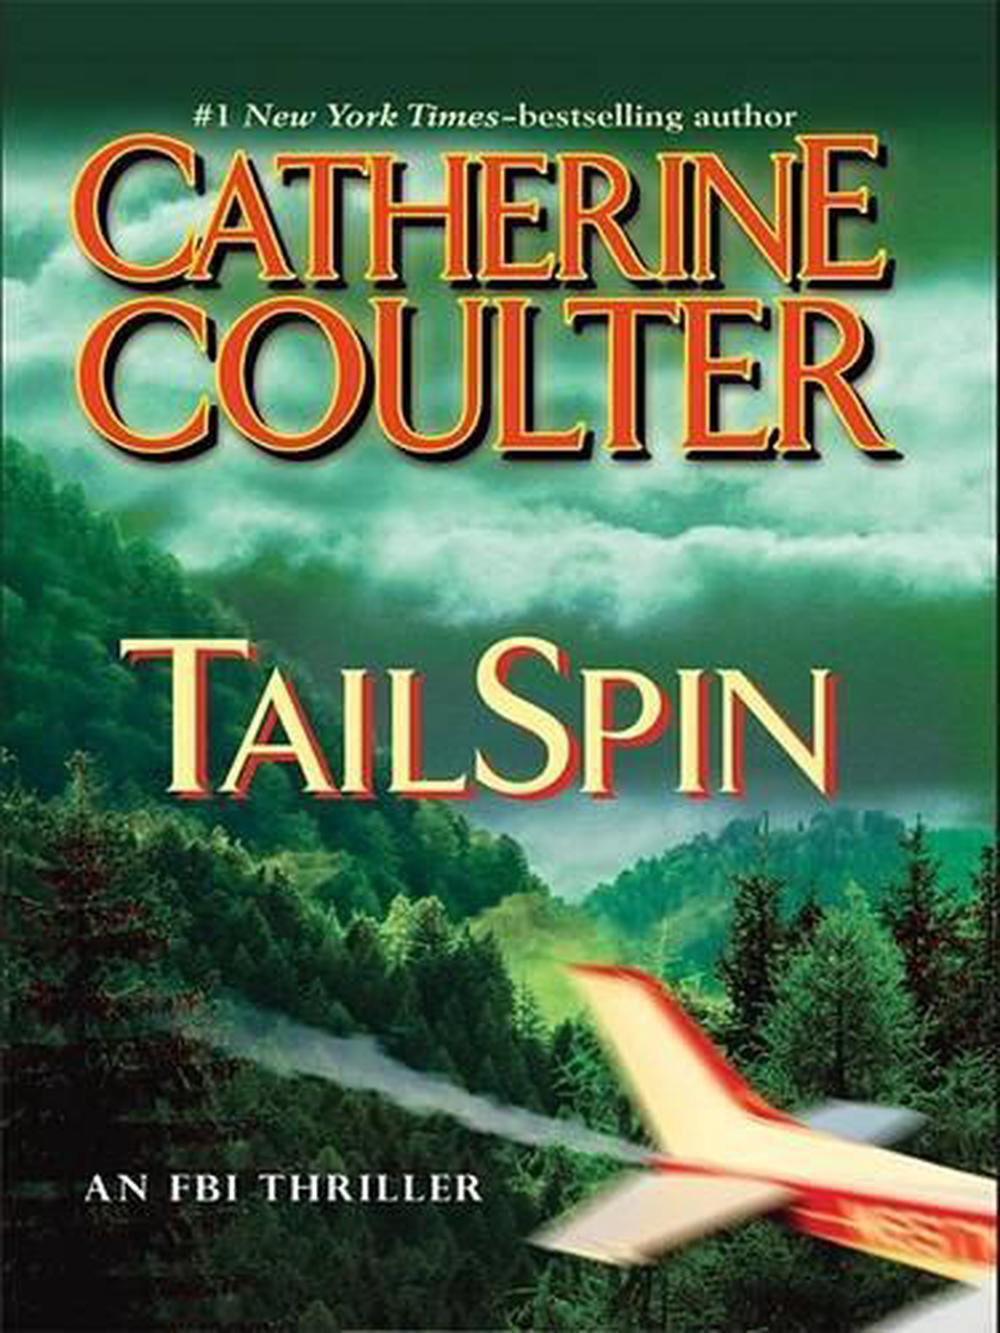 Tailspin by John Armbruster